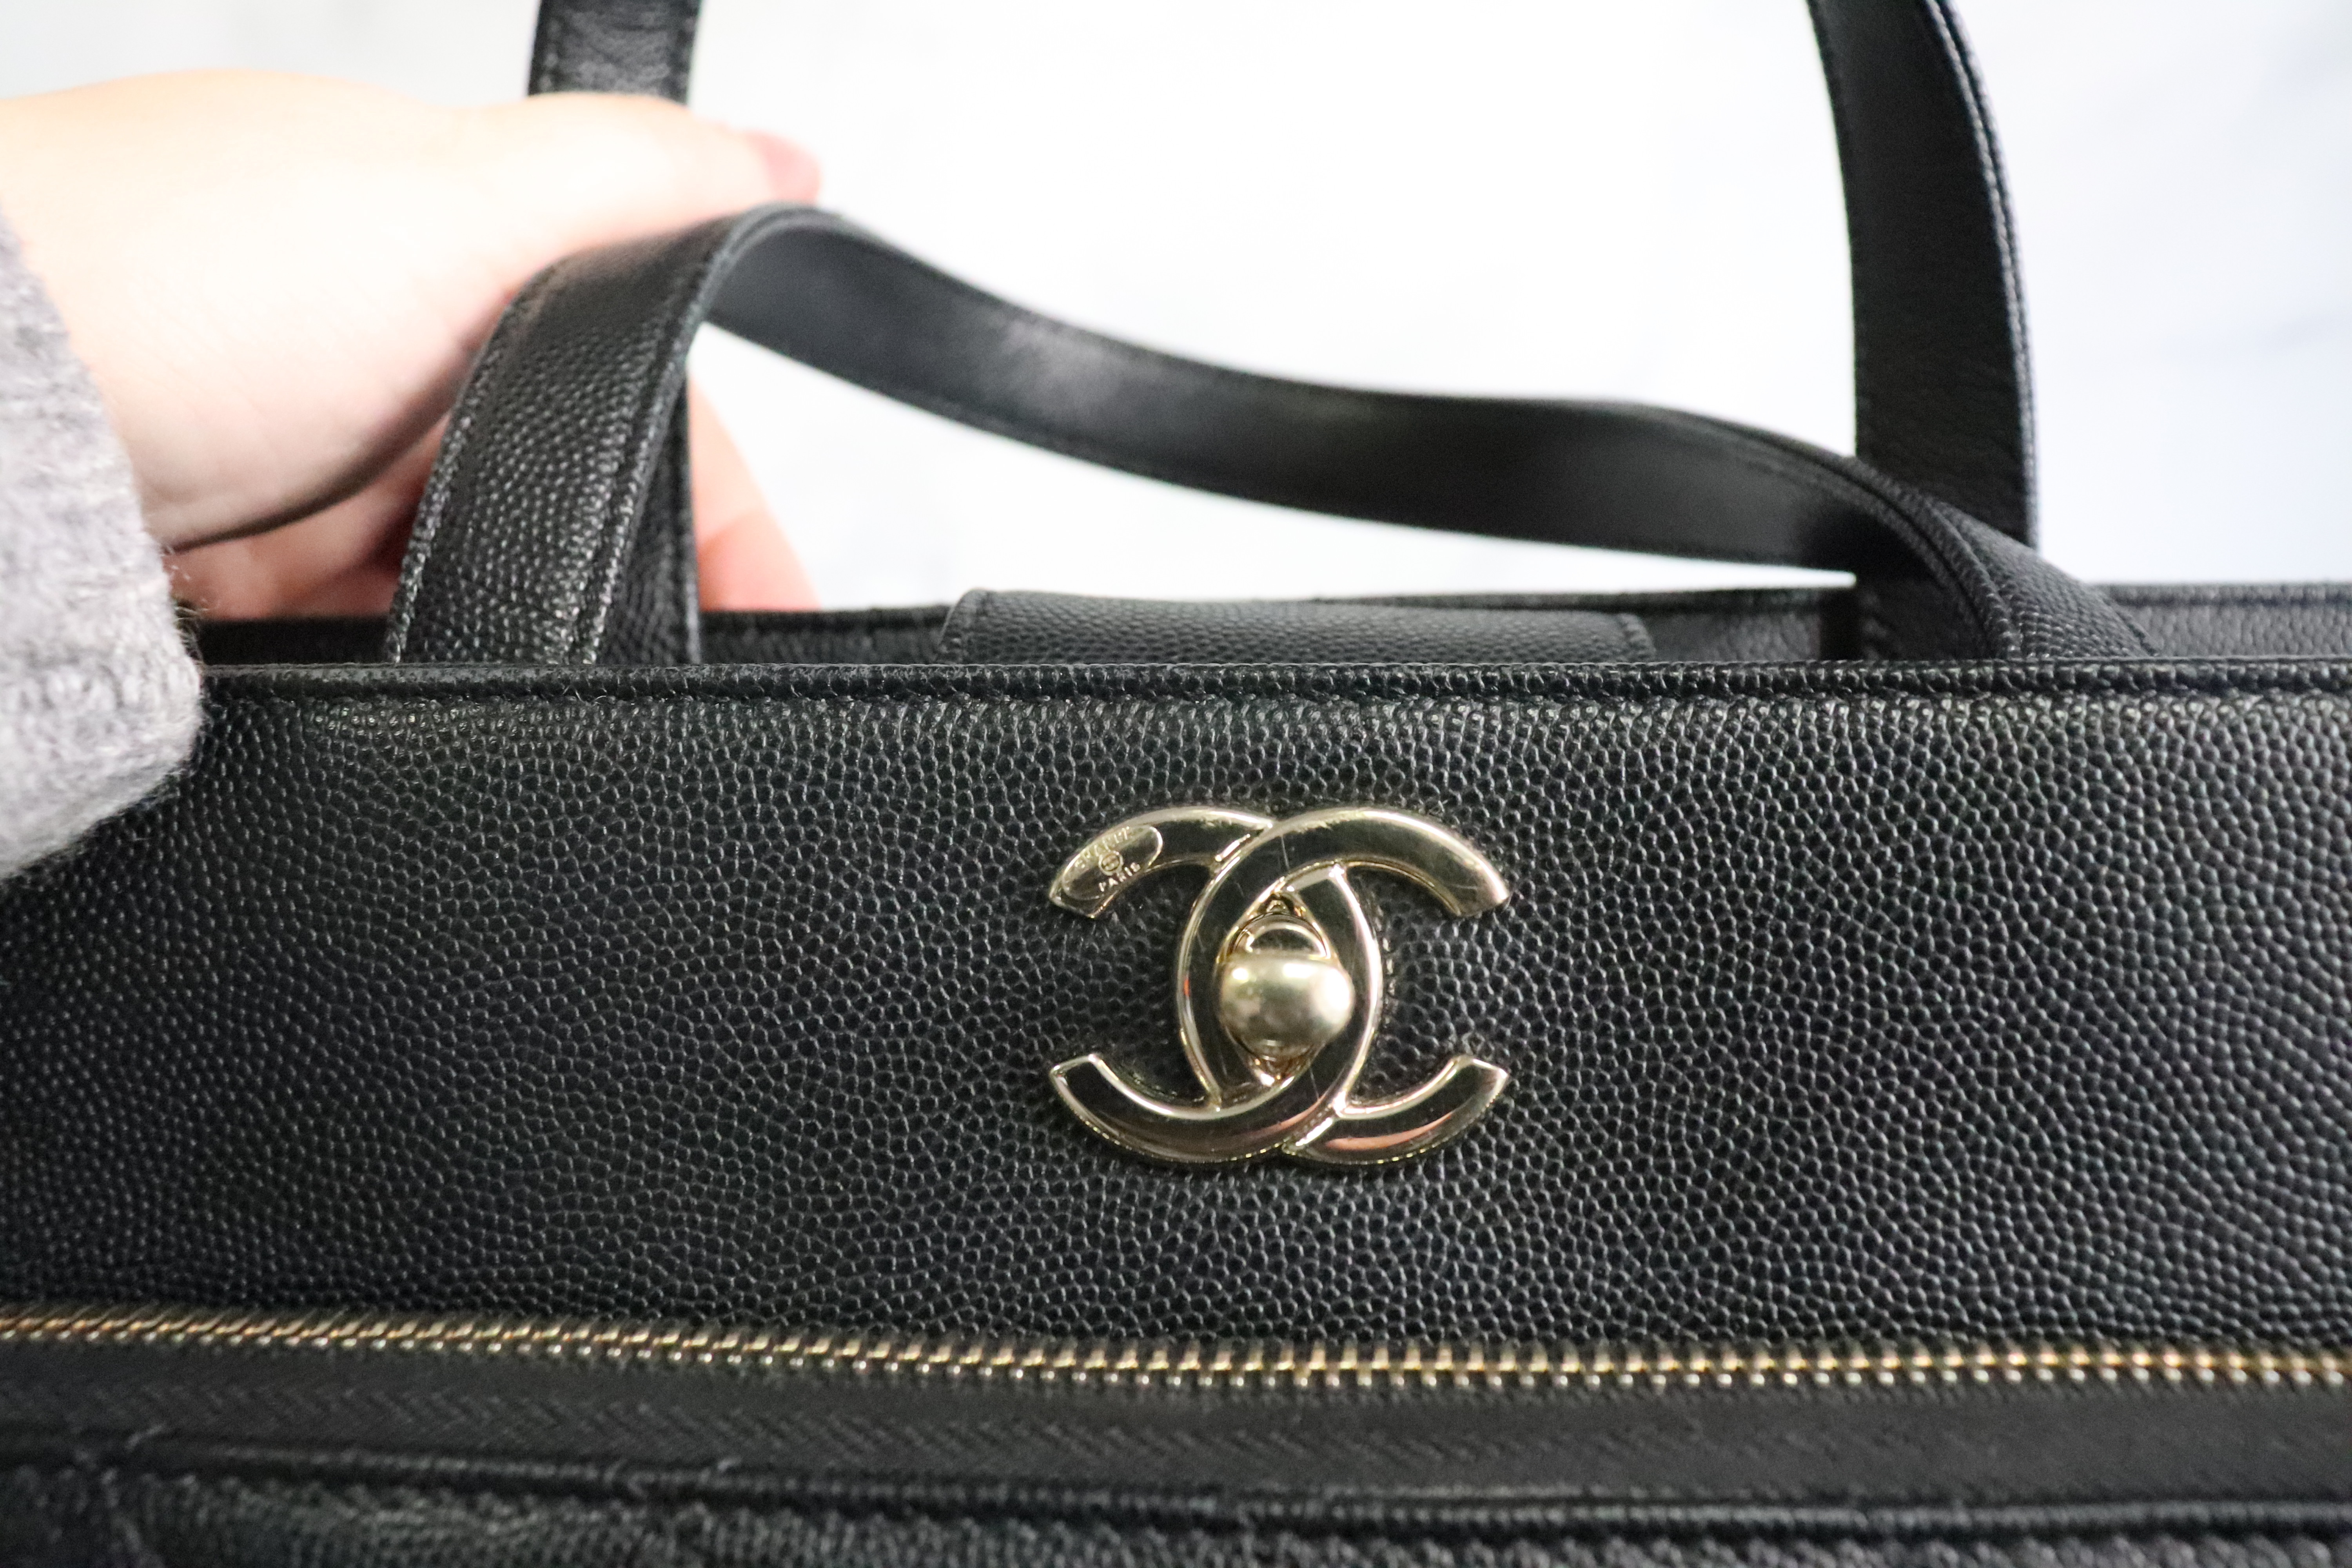 Chanel Business Affinity Tote Bag, Black Caviar Leather, Gold